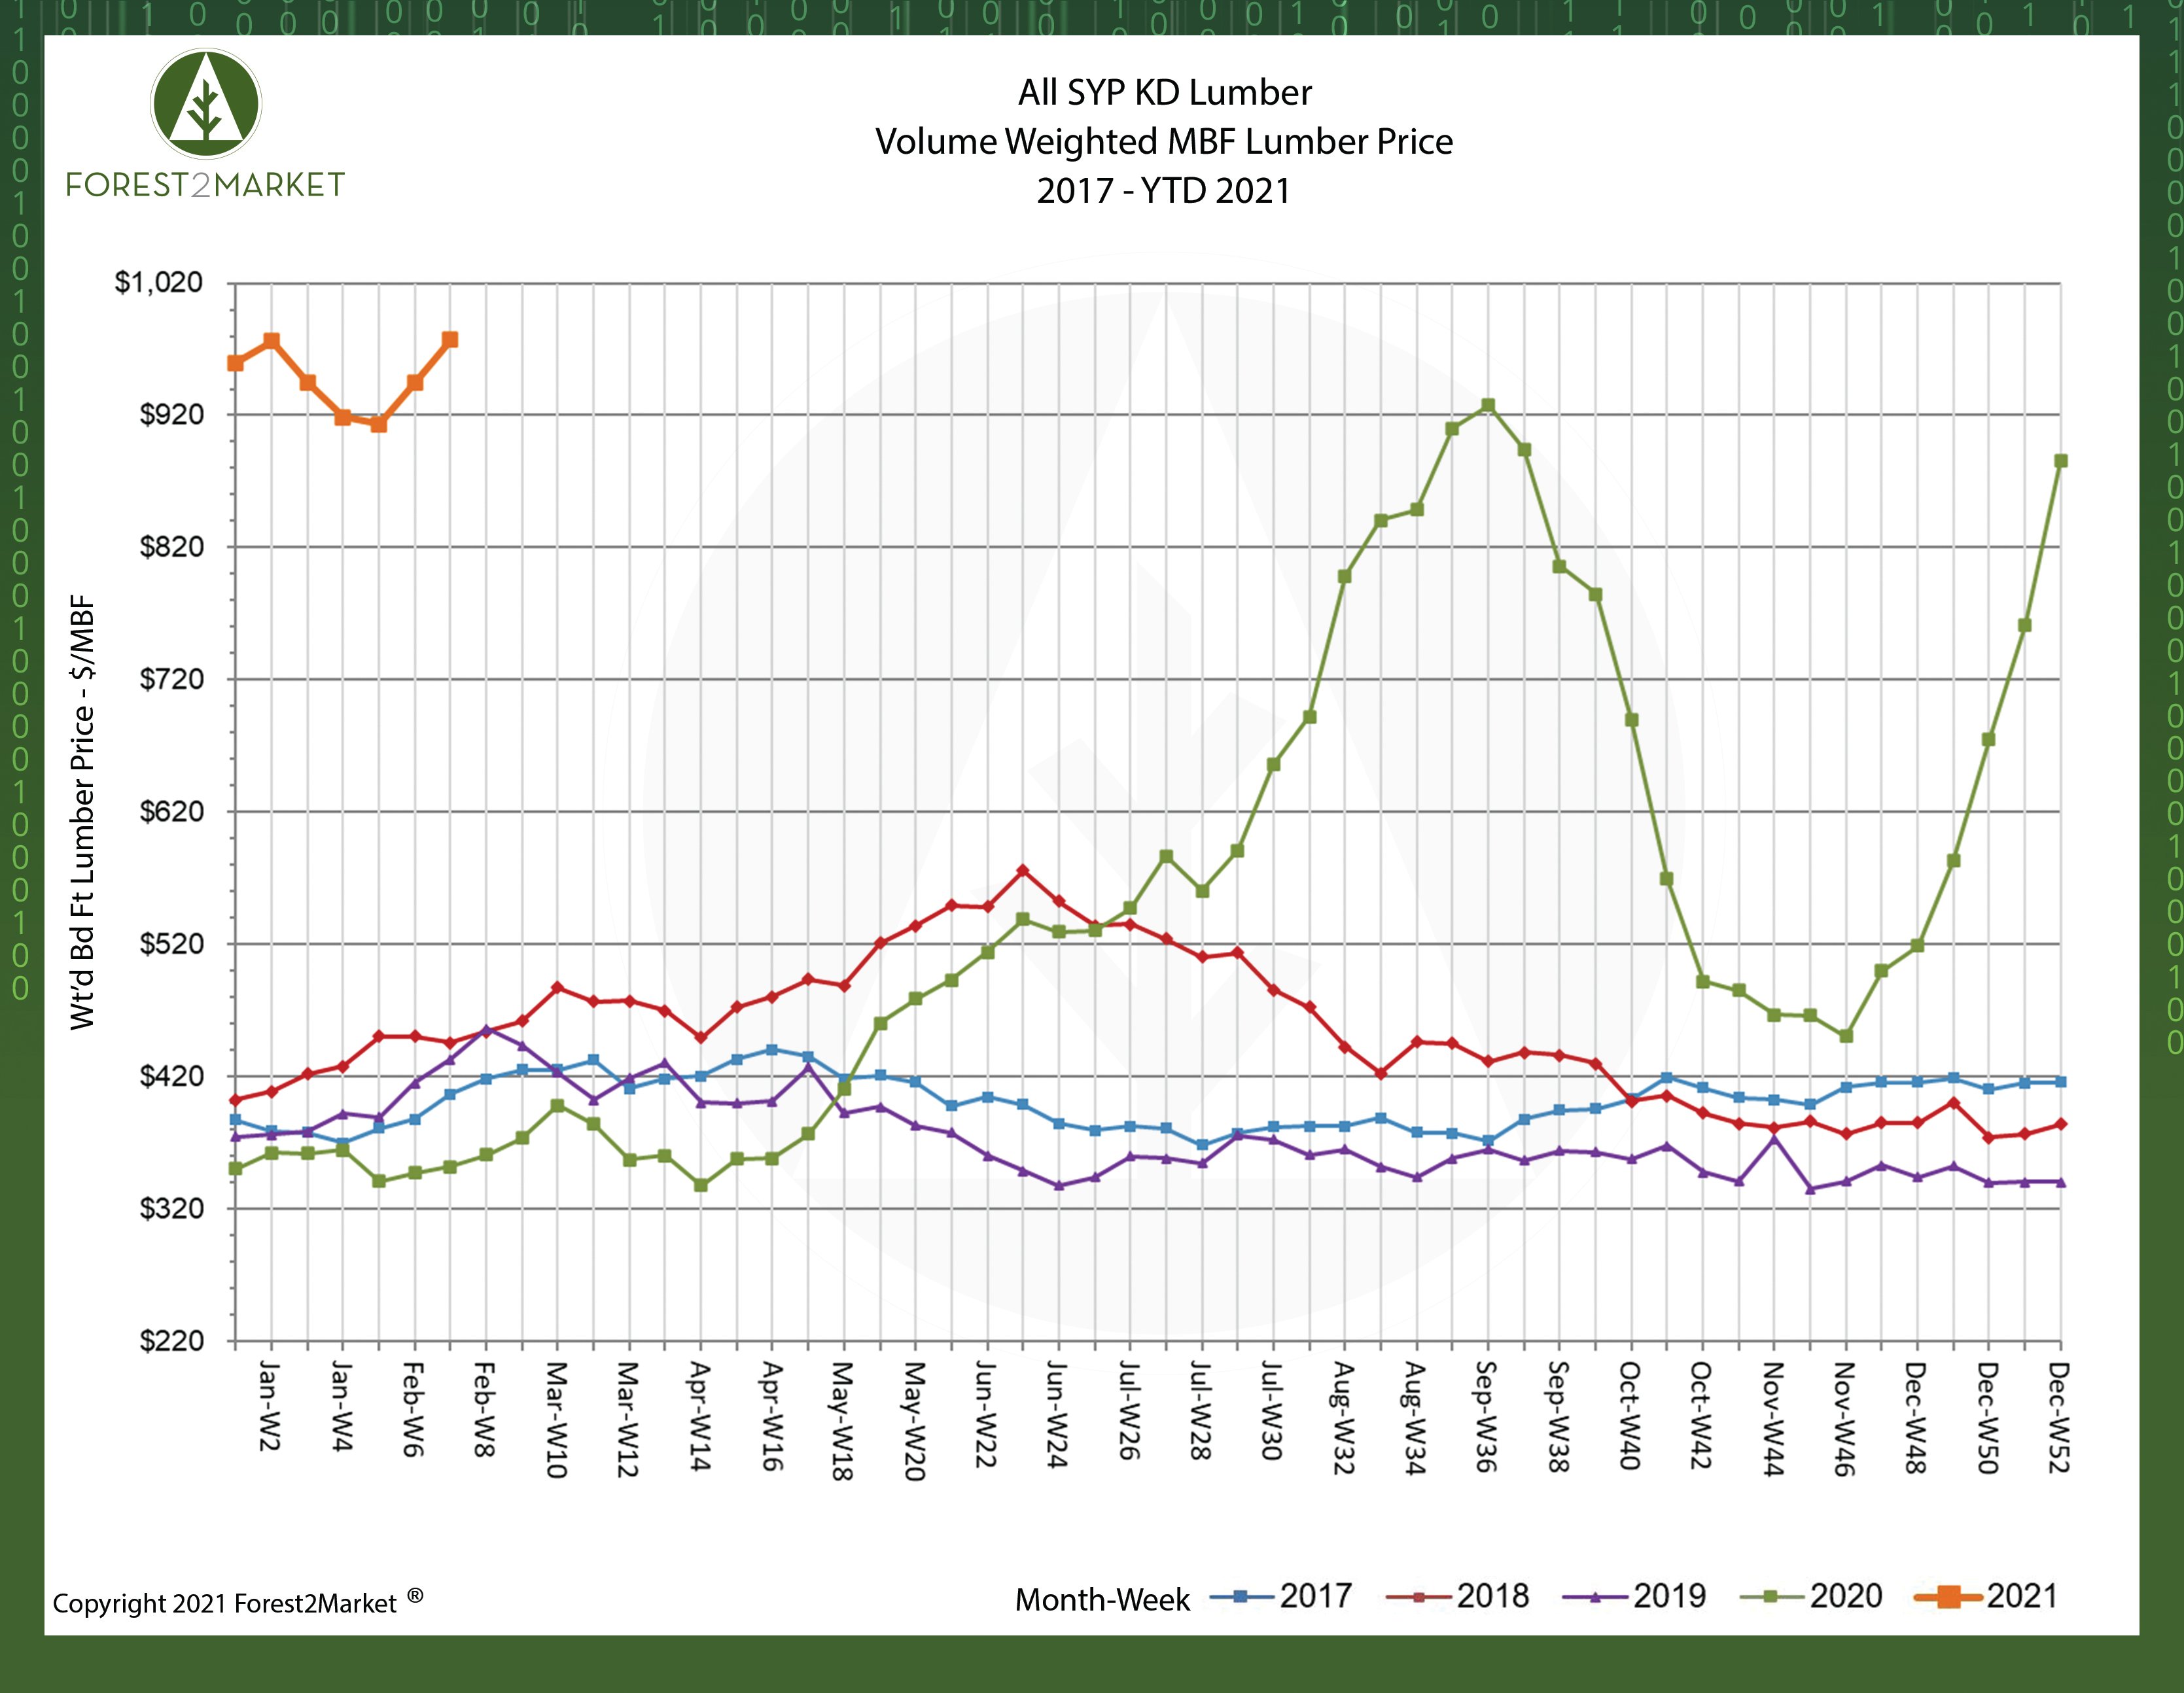 BREAKING: SYP Lumber Prices Hit New Record High